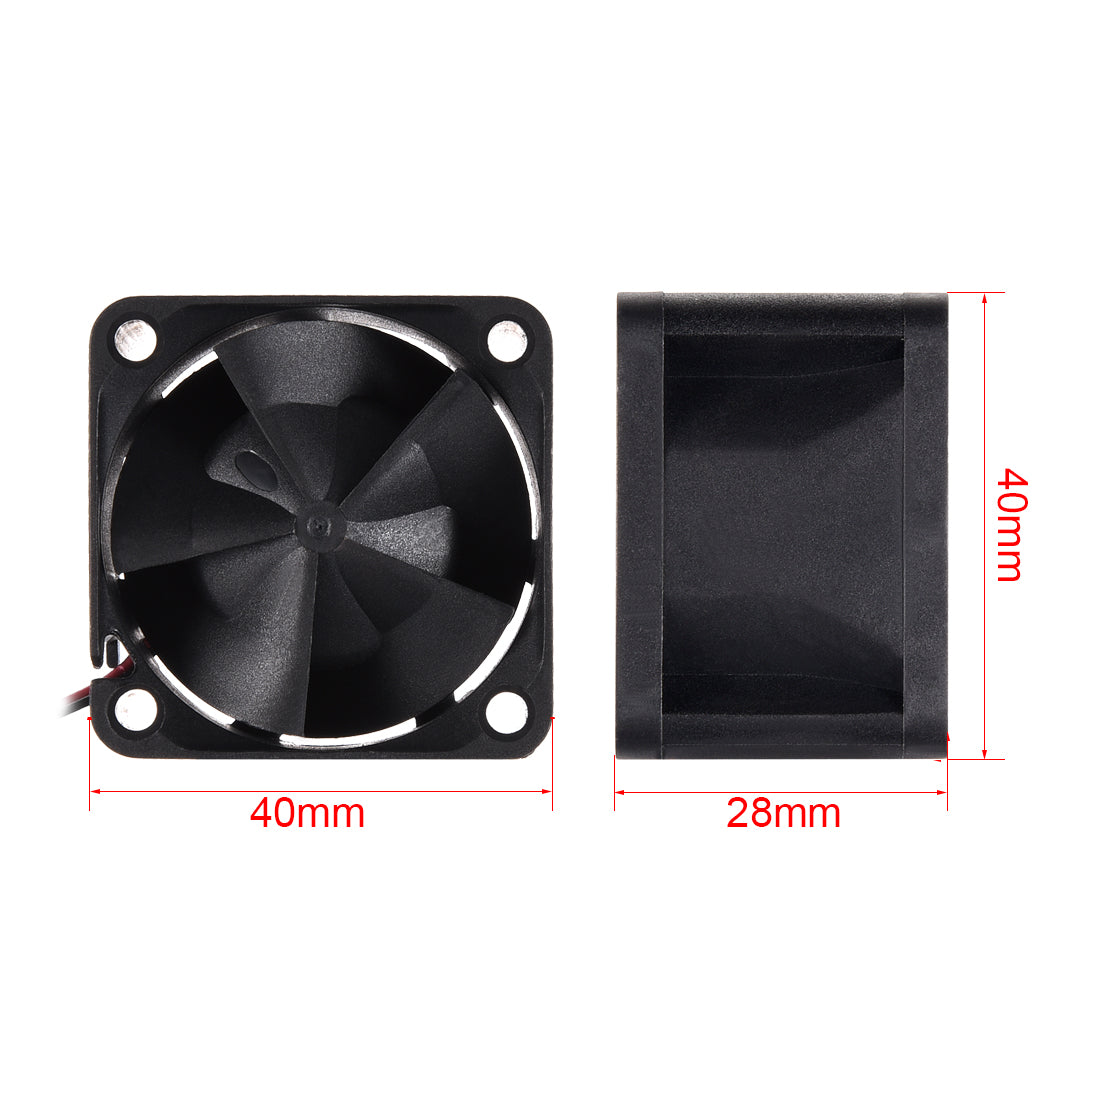 uxcell Uxcell SNOWFAN Authorized 40mm x 40mm x 28mm 24V Brushless DC Cooling Fan #0372